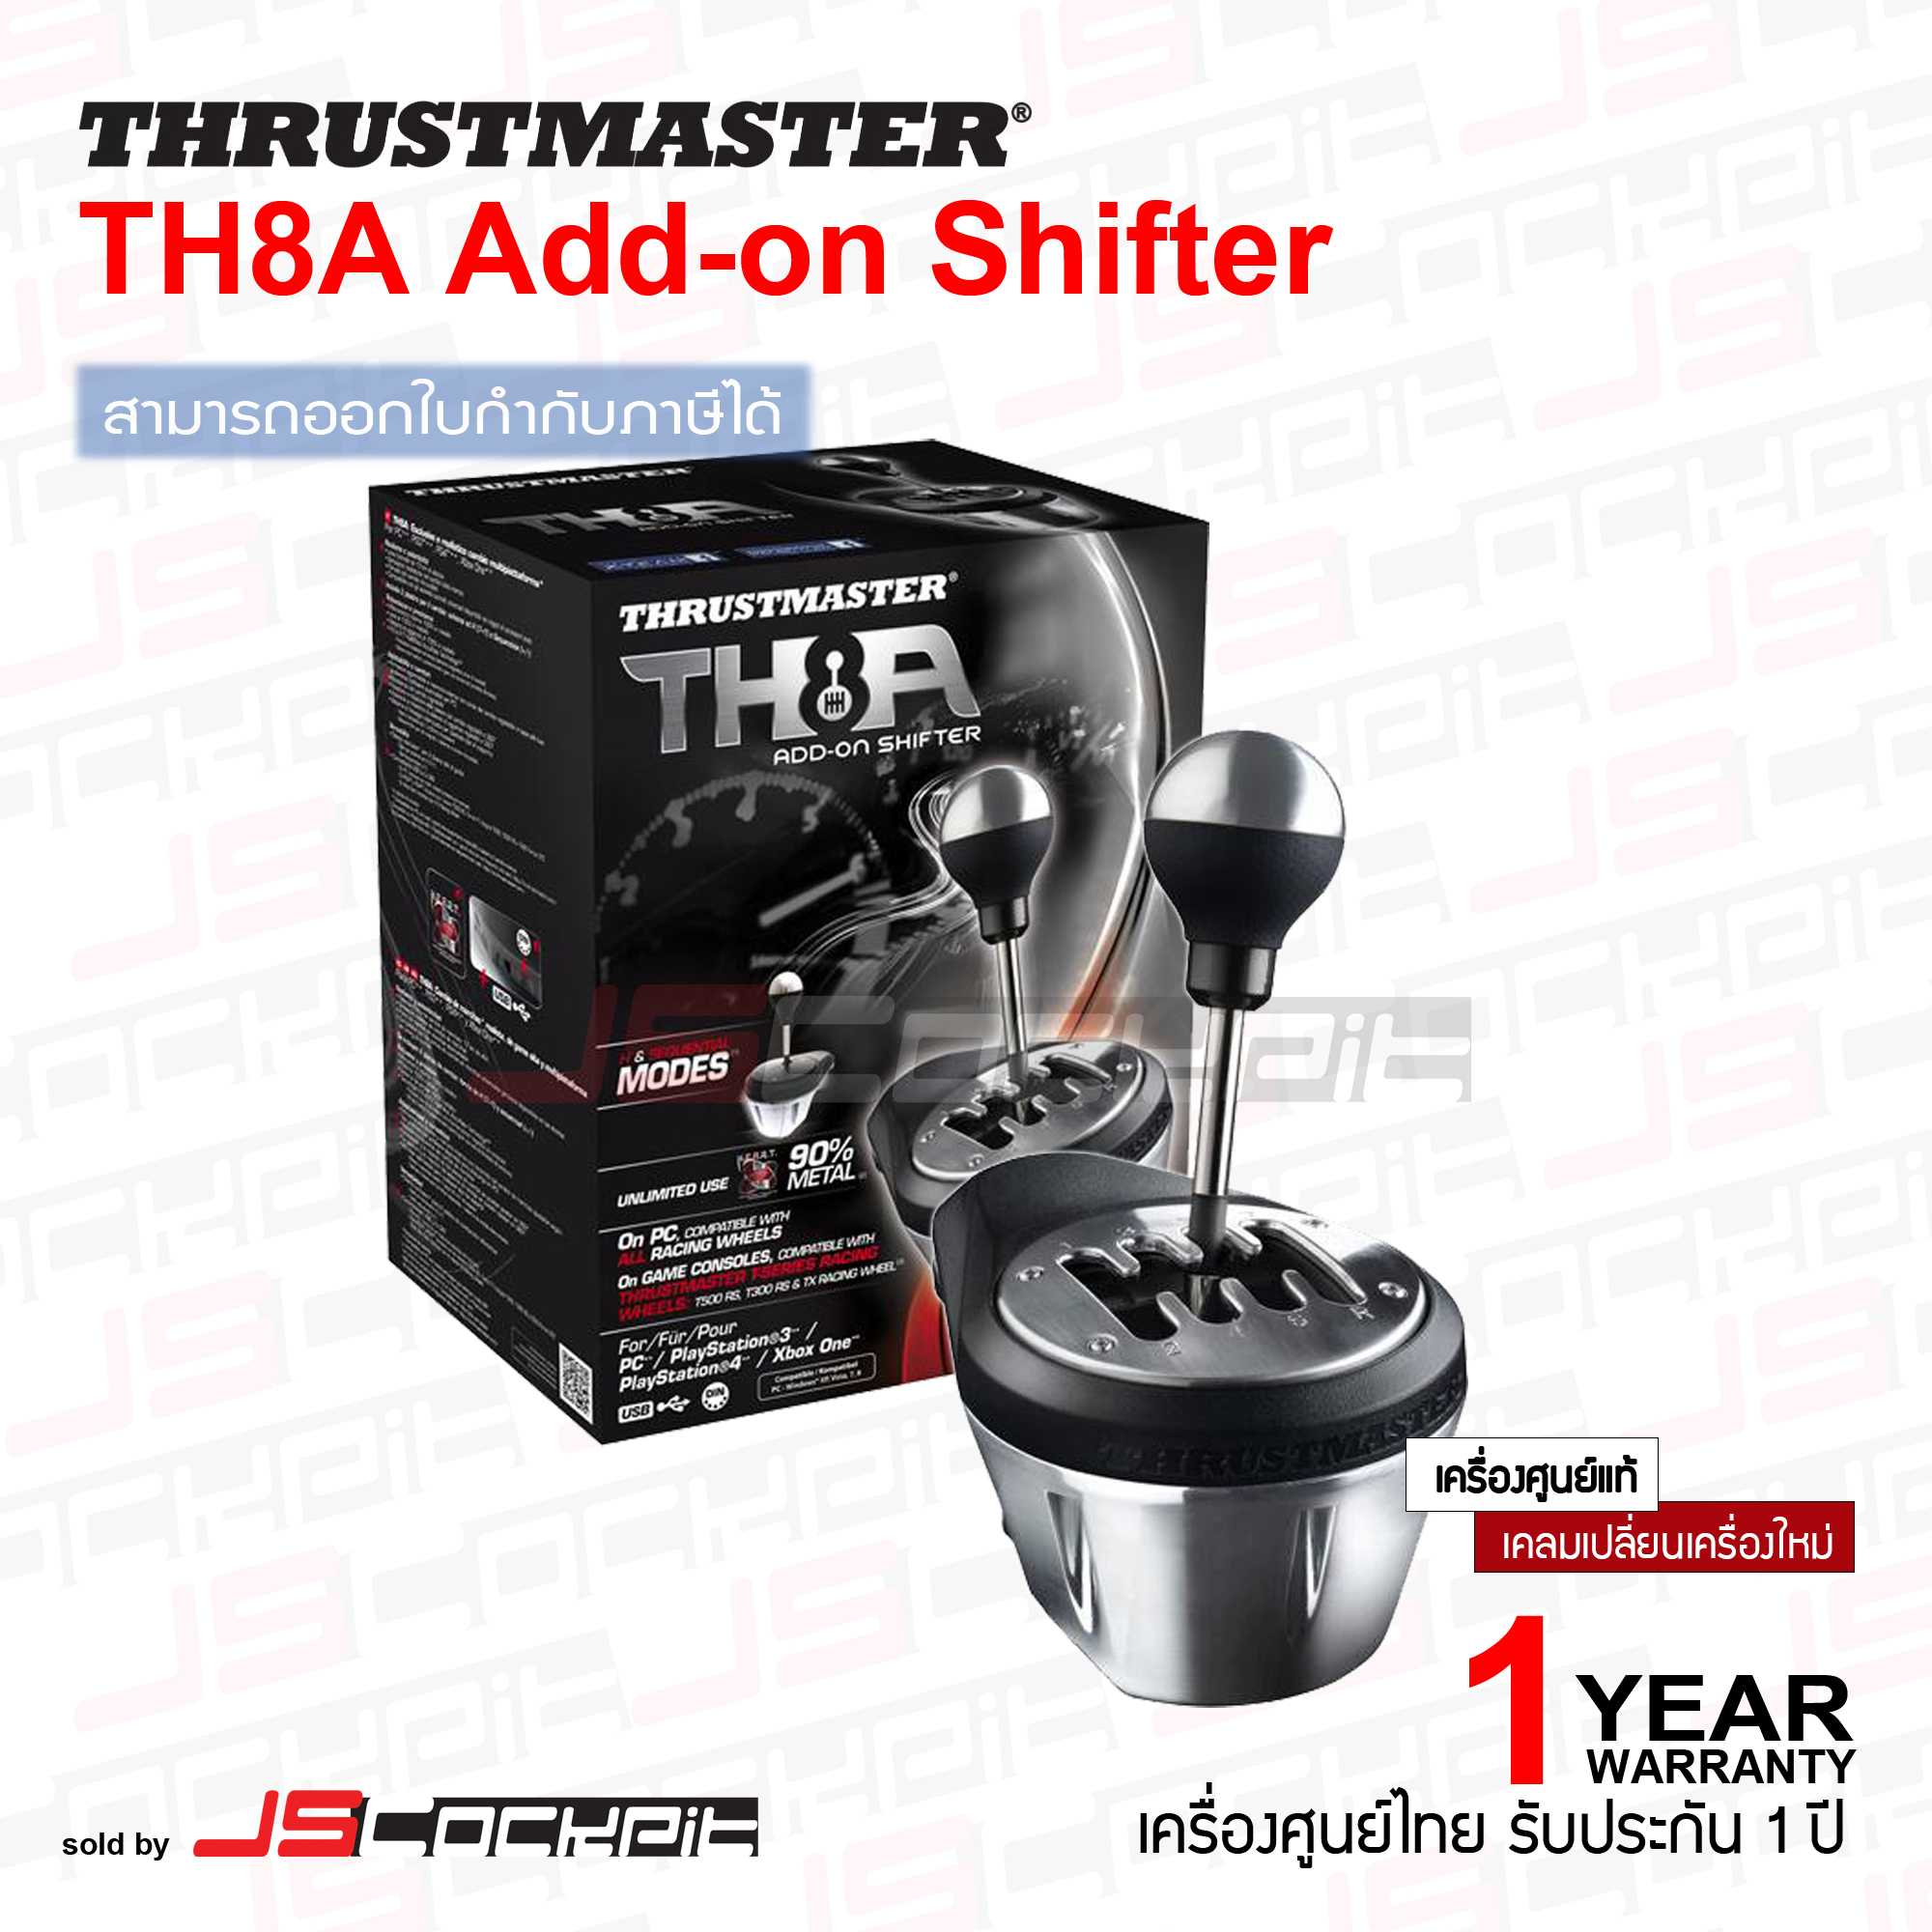 thrustmaster th8a add on shifter - Buy thrustmaster th8a add on